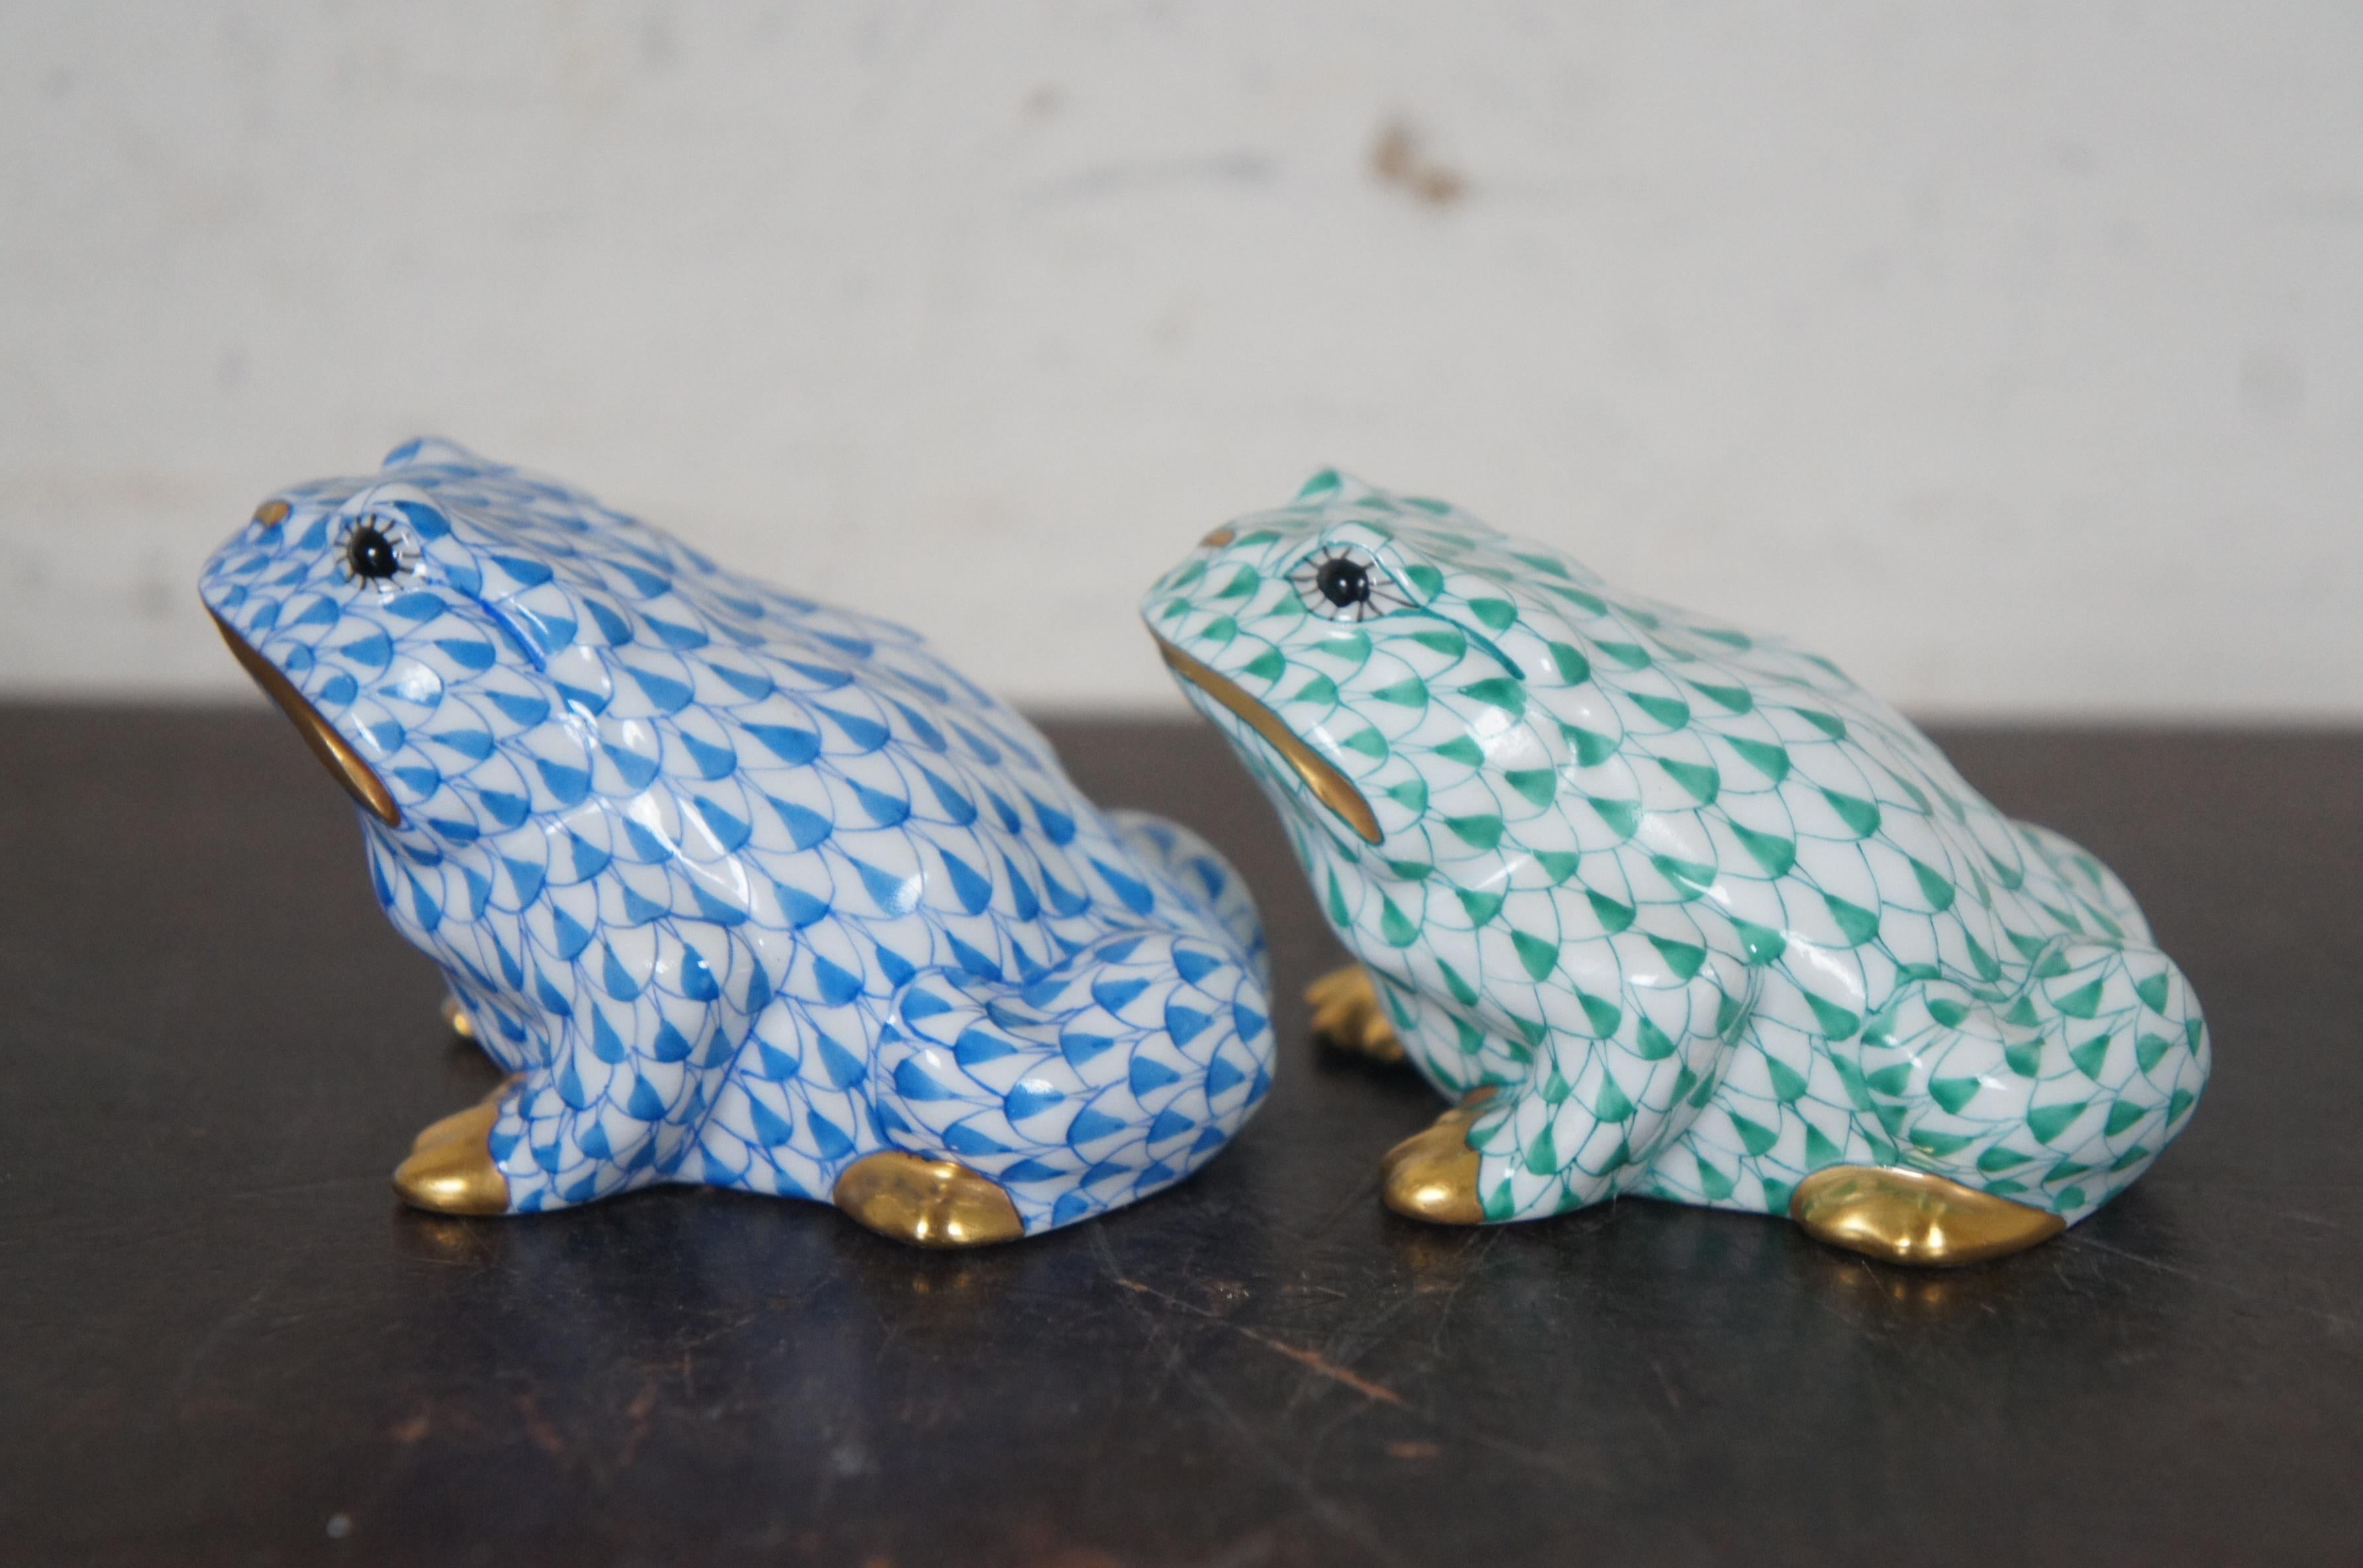 2 Herend Hungary Porcelain Fishnet Enameled Frog Todd the Toad Figurines Pair 2